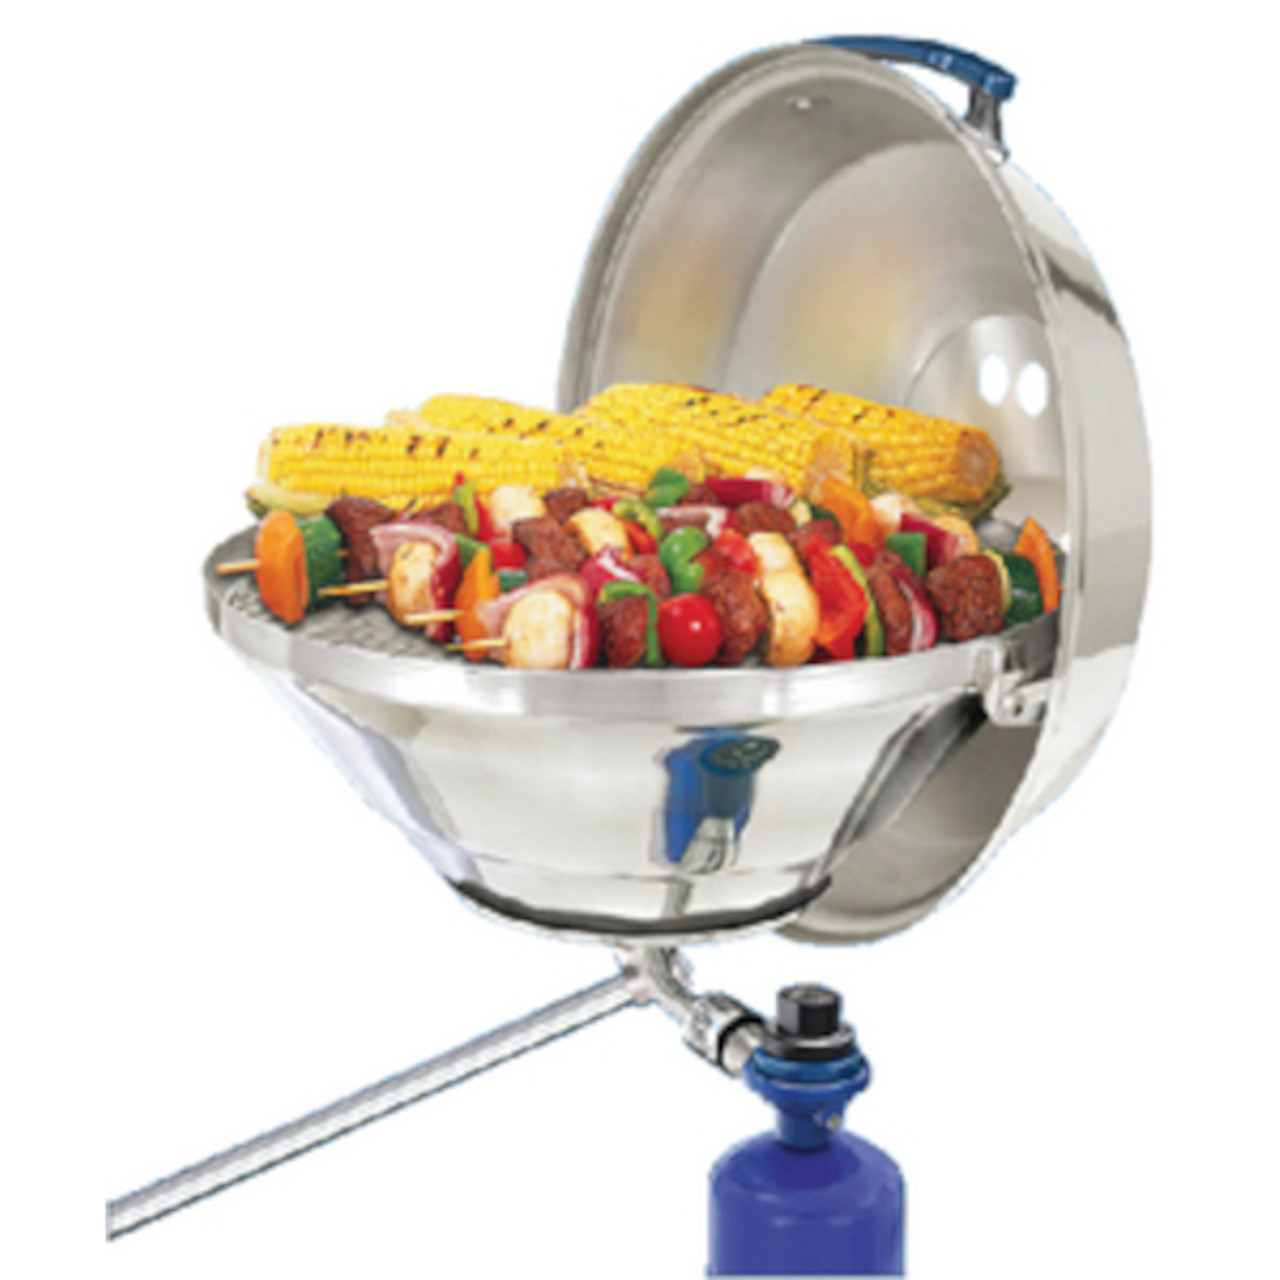 Magma Marine Kettle Original Size Propane Gas Grill with Hinged Lid for Boats